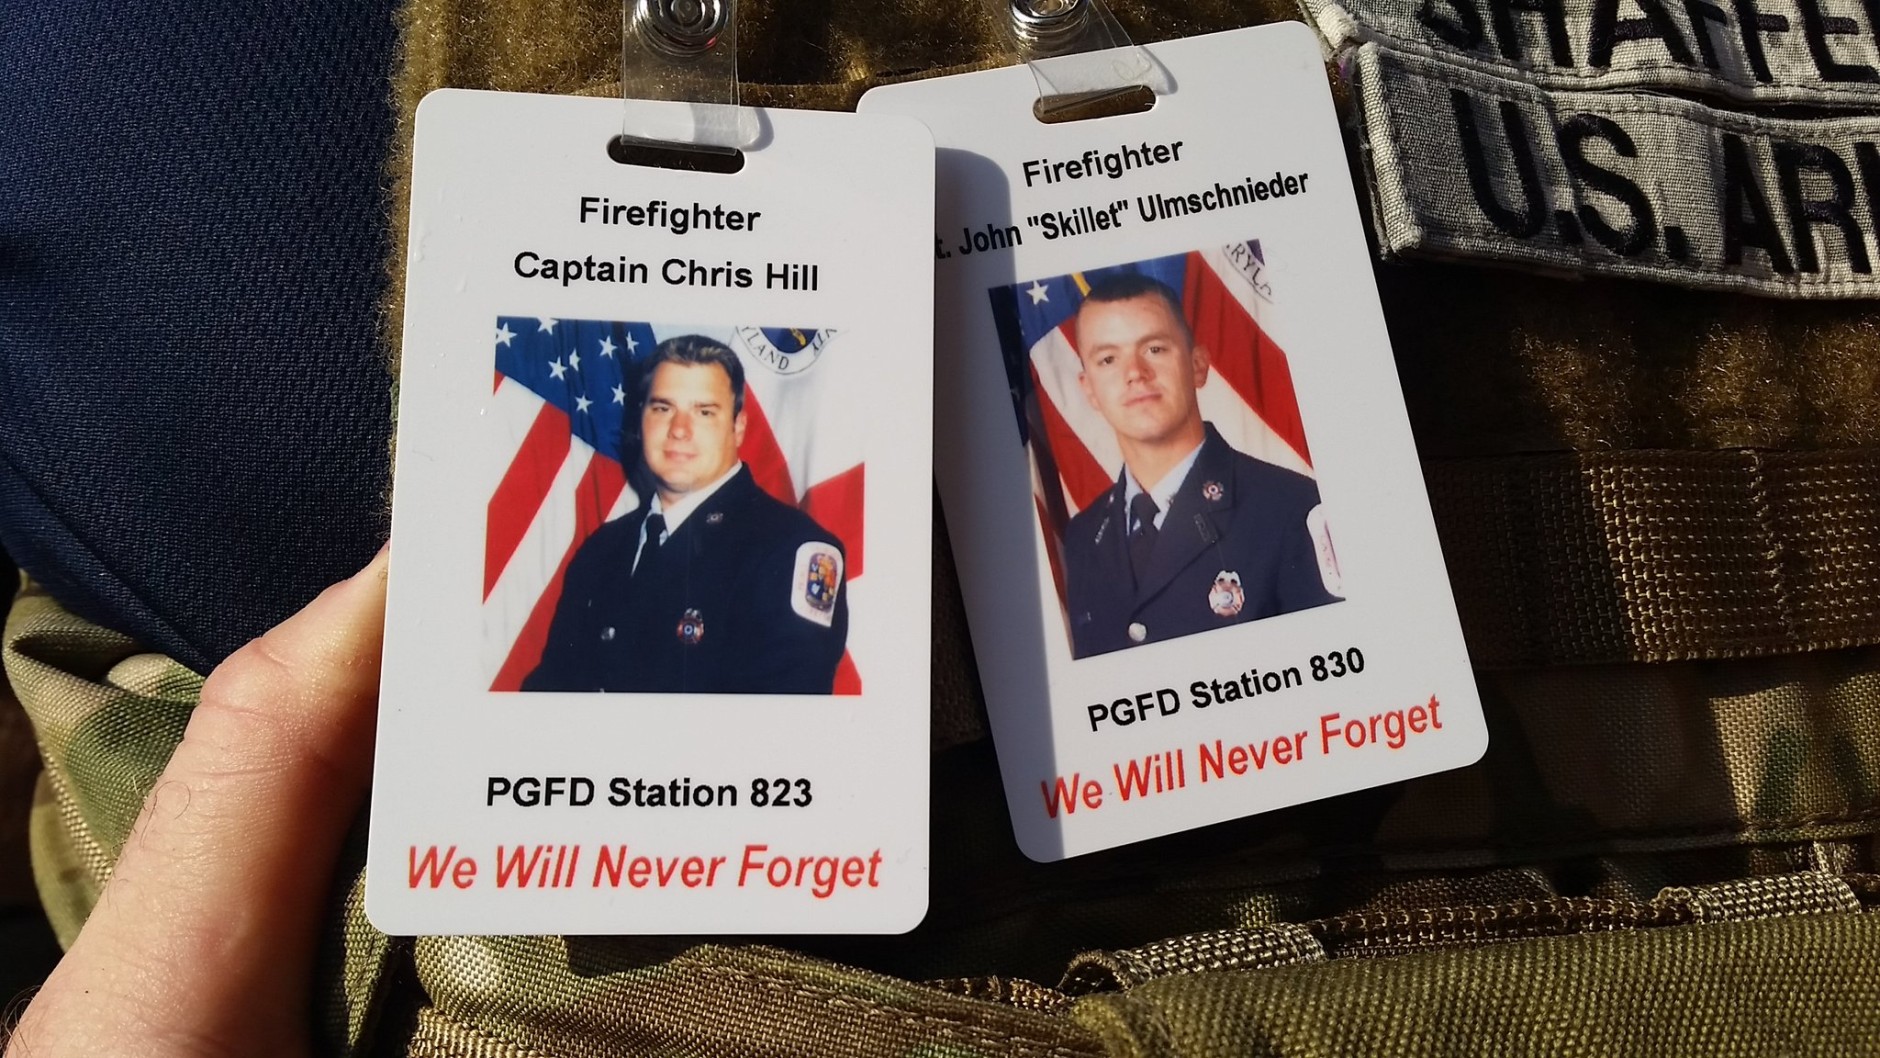 County firefighter John “Skillet” Ulmschneider was shot and killed in April while answering a call, and county firefighter Chris Hill died in August of brain cancer related to the job, said Prince George's County Fire Chief Marc Bashoor. Both firefighters were honored during the 9/11 Memorial Stair Climb event Saturday at National Harbor. (WTOP/Kathy Stewart)